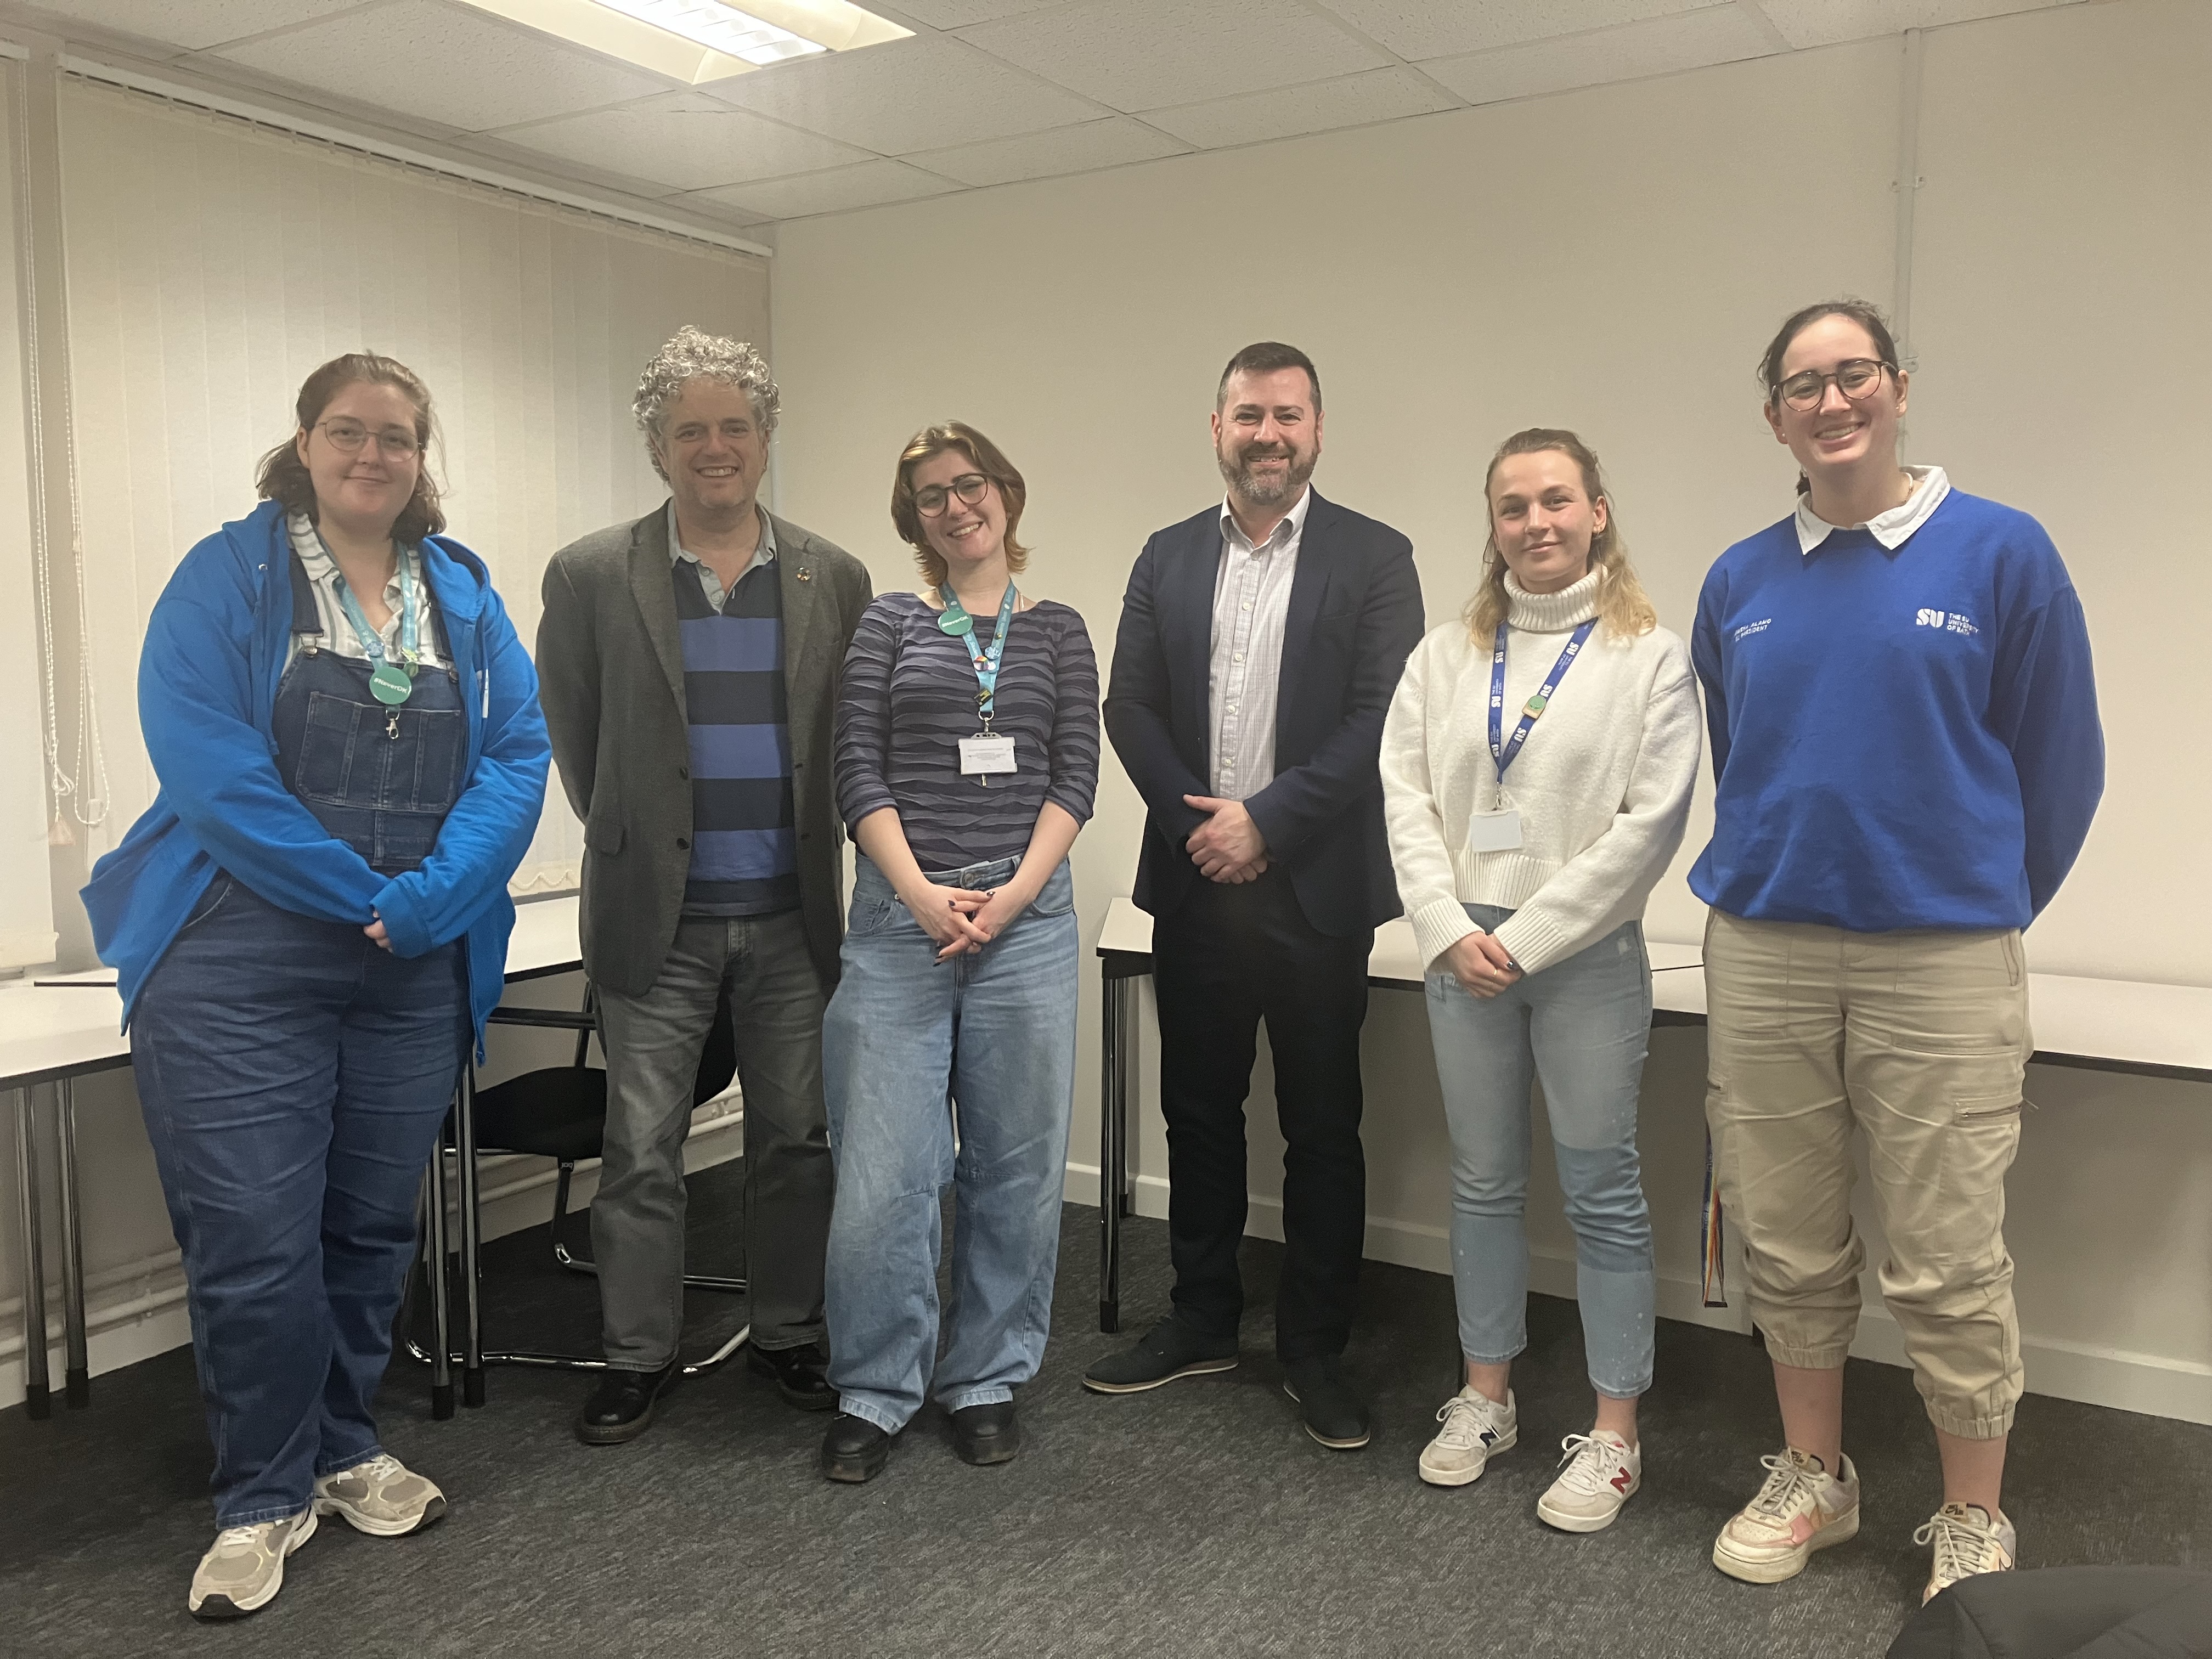 Councillor Kevin Guy, Leader of Bath & North East Somerset Council and Councillor Matt McCabe with the Student Union presidents and their deputies from the universities of Bath and Bath Spa.